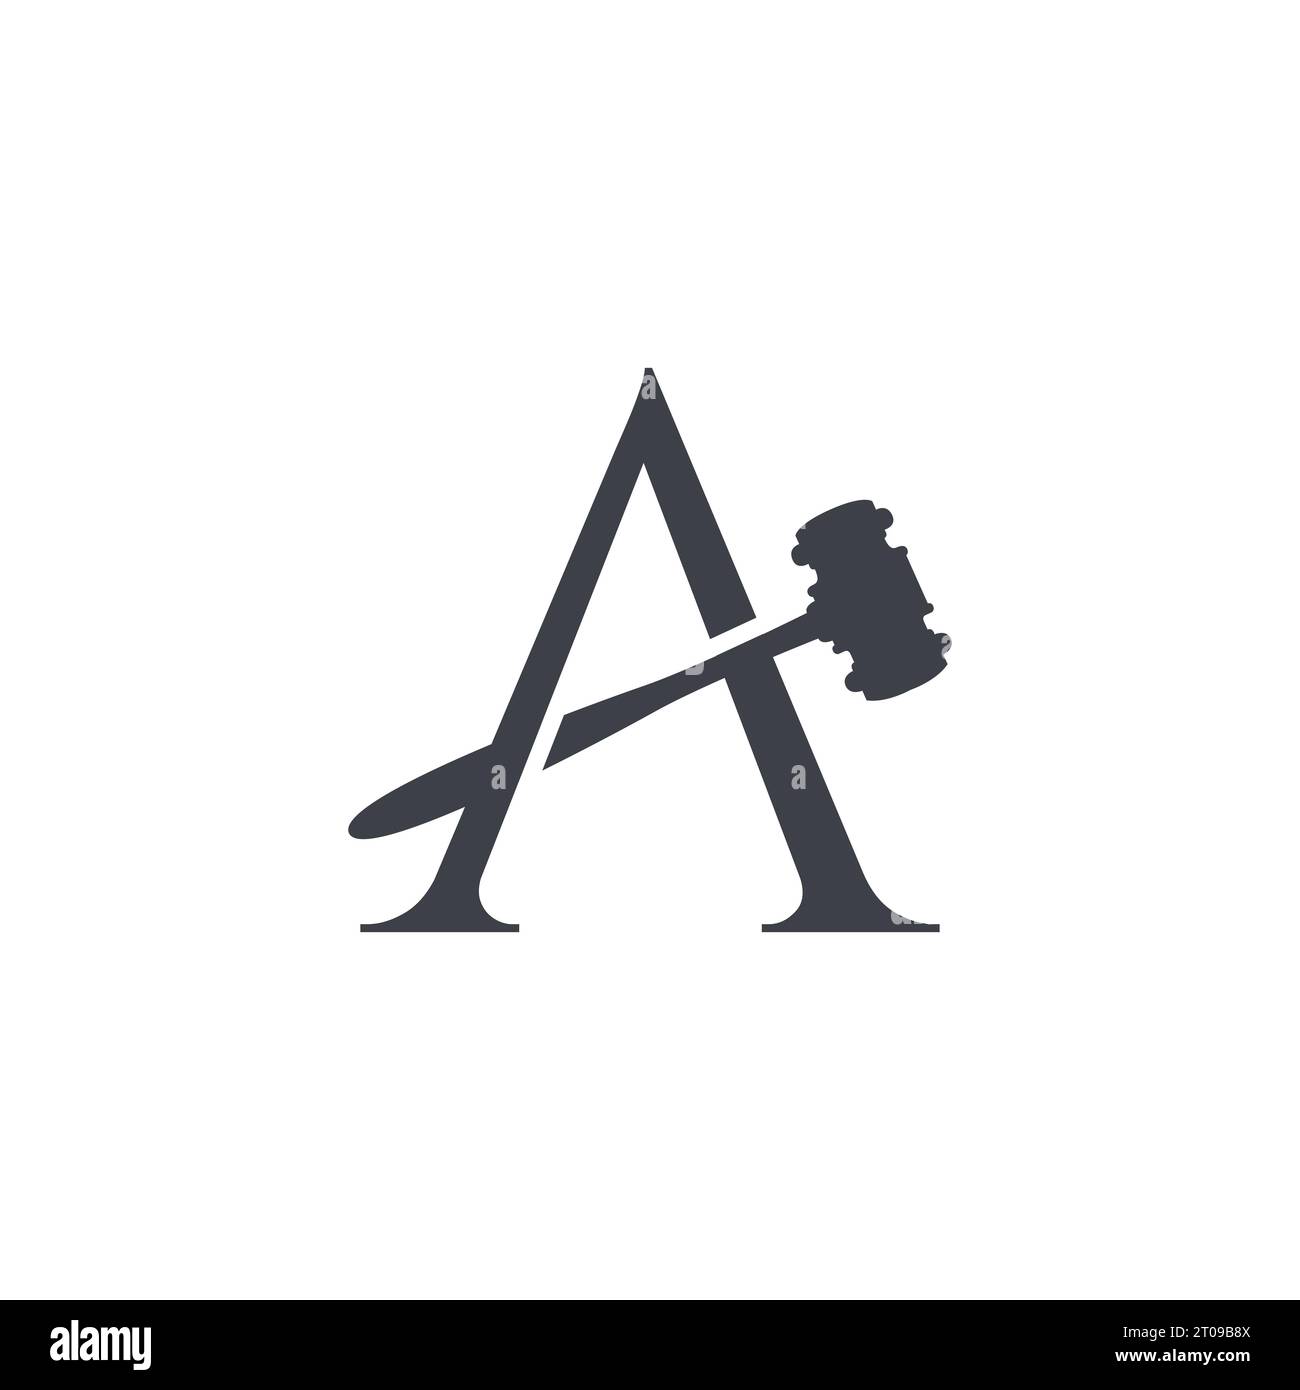 Law firm logo with initial letter a concept. Initial letter A law firm logo design. Law firm logo with initial A letter and judge hammer image vector Stock Vector